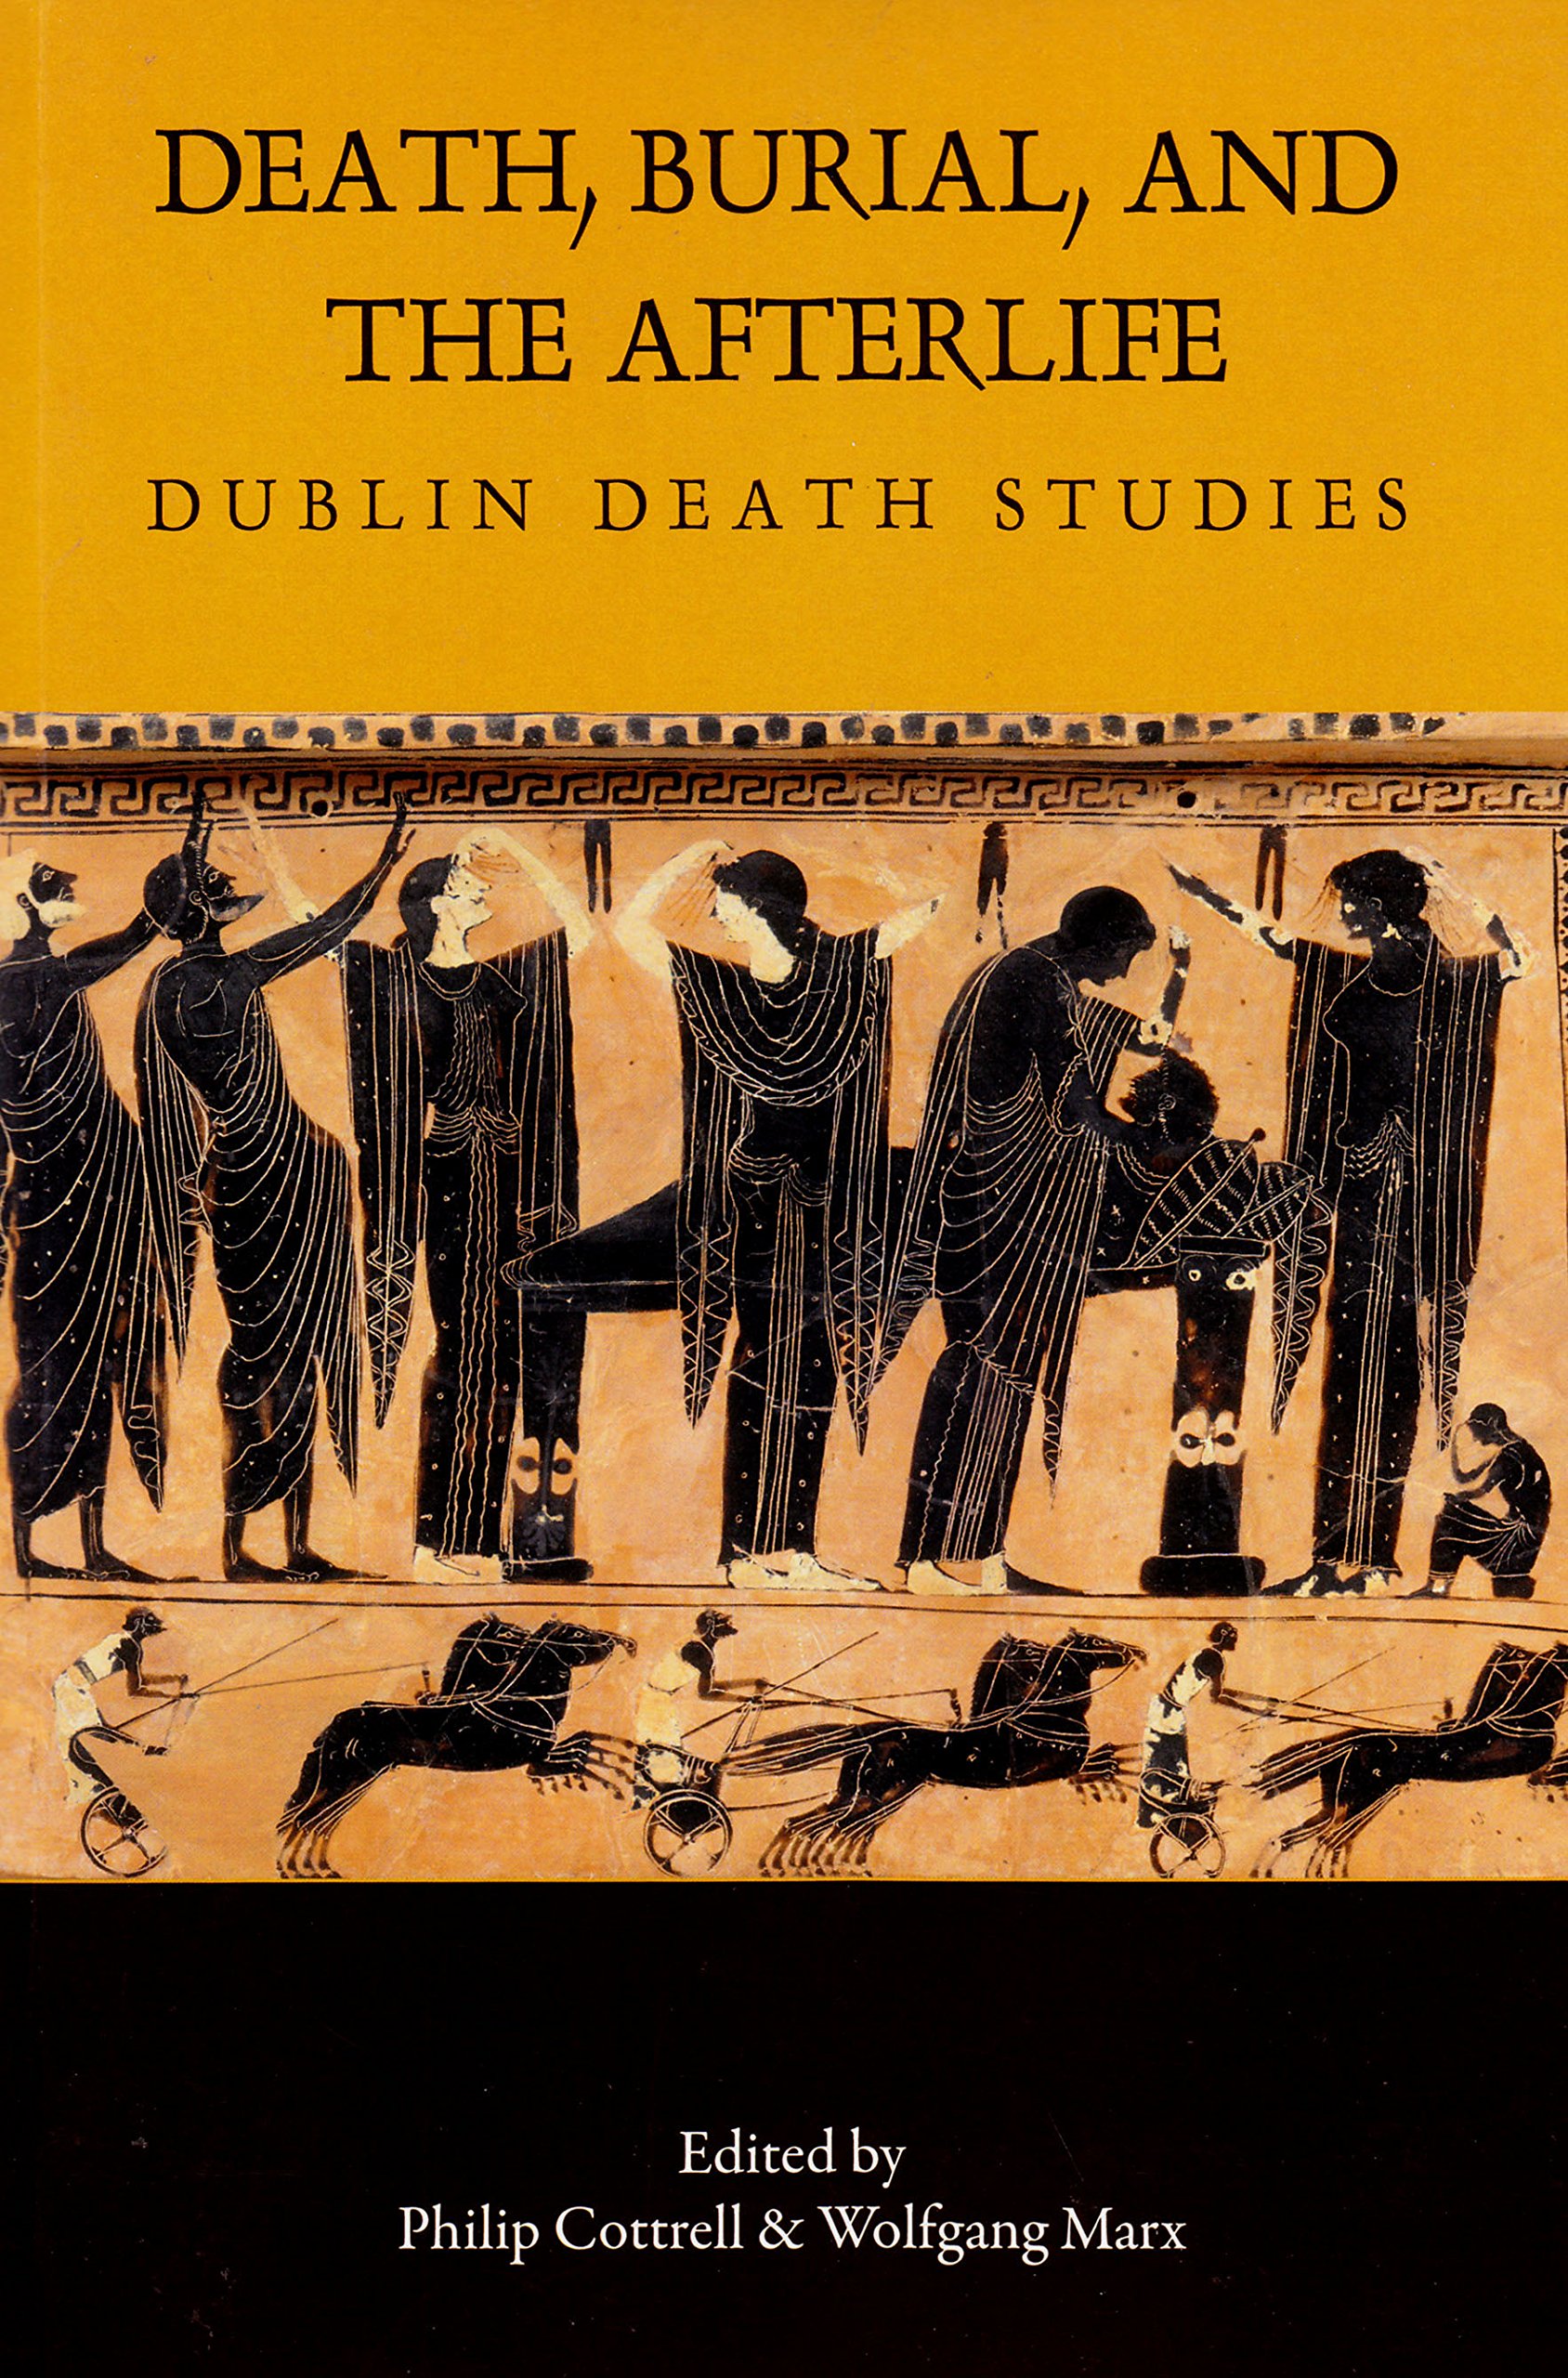 Death, Burial, and the Afterlife: Dublin Death Studies